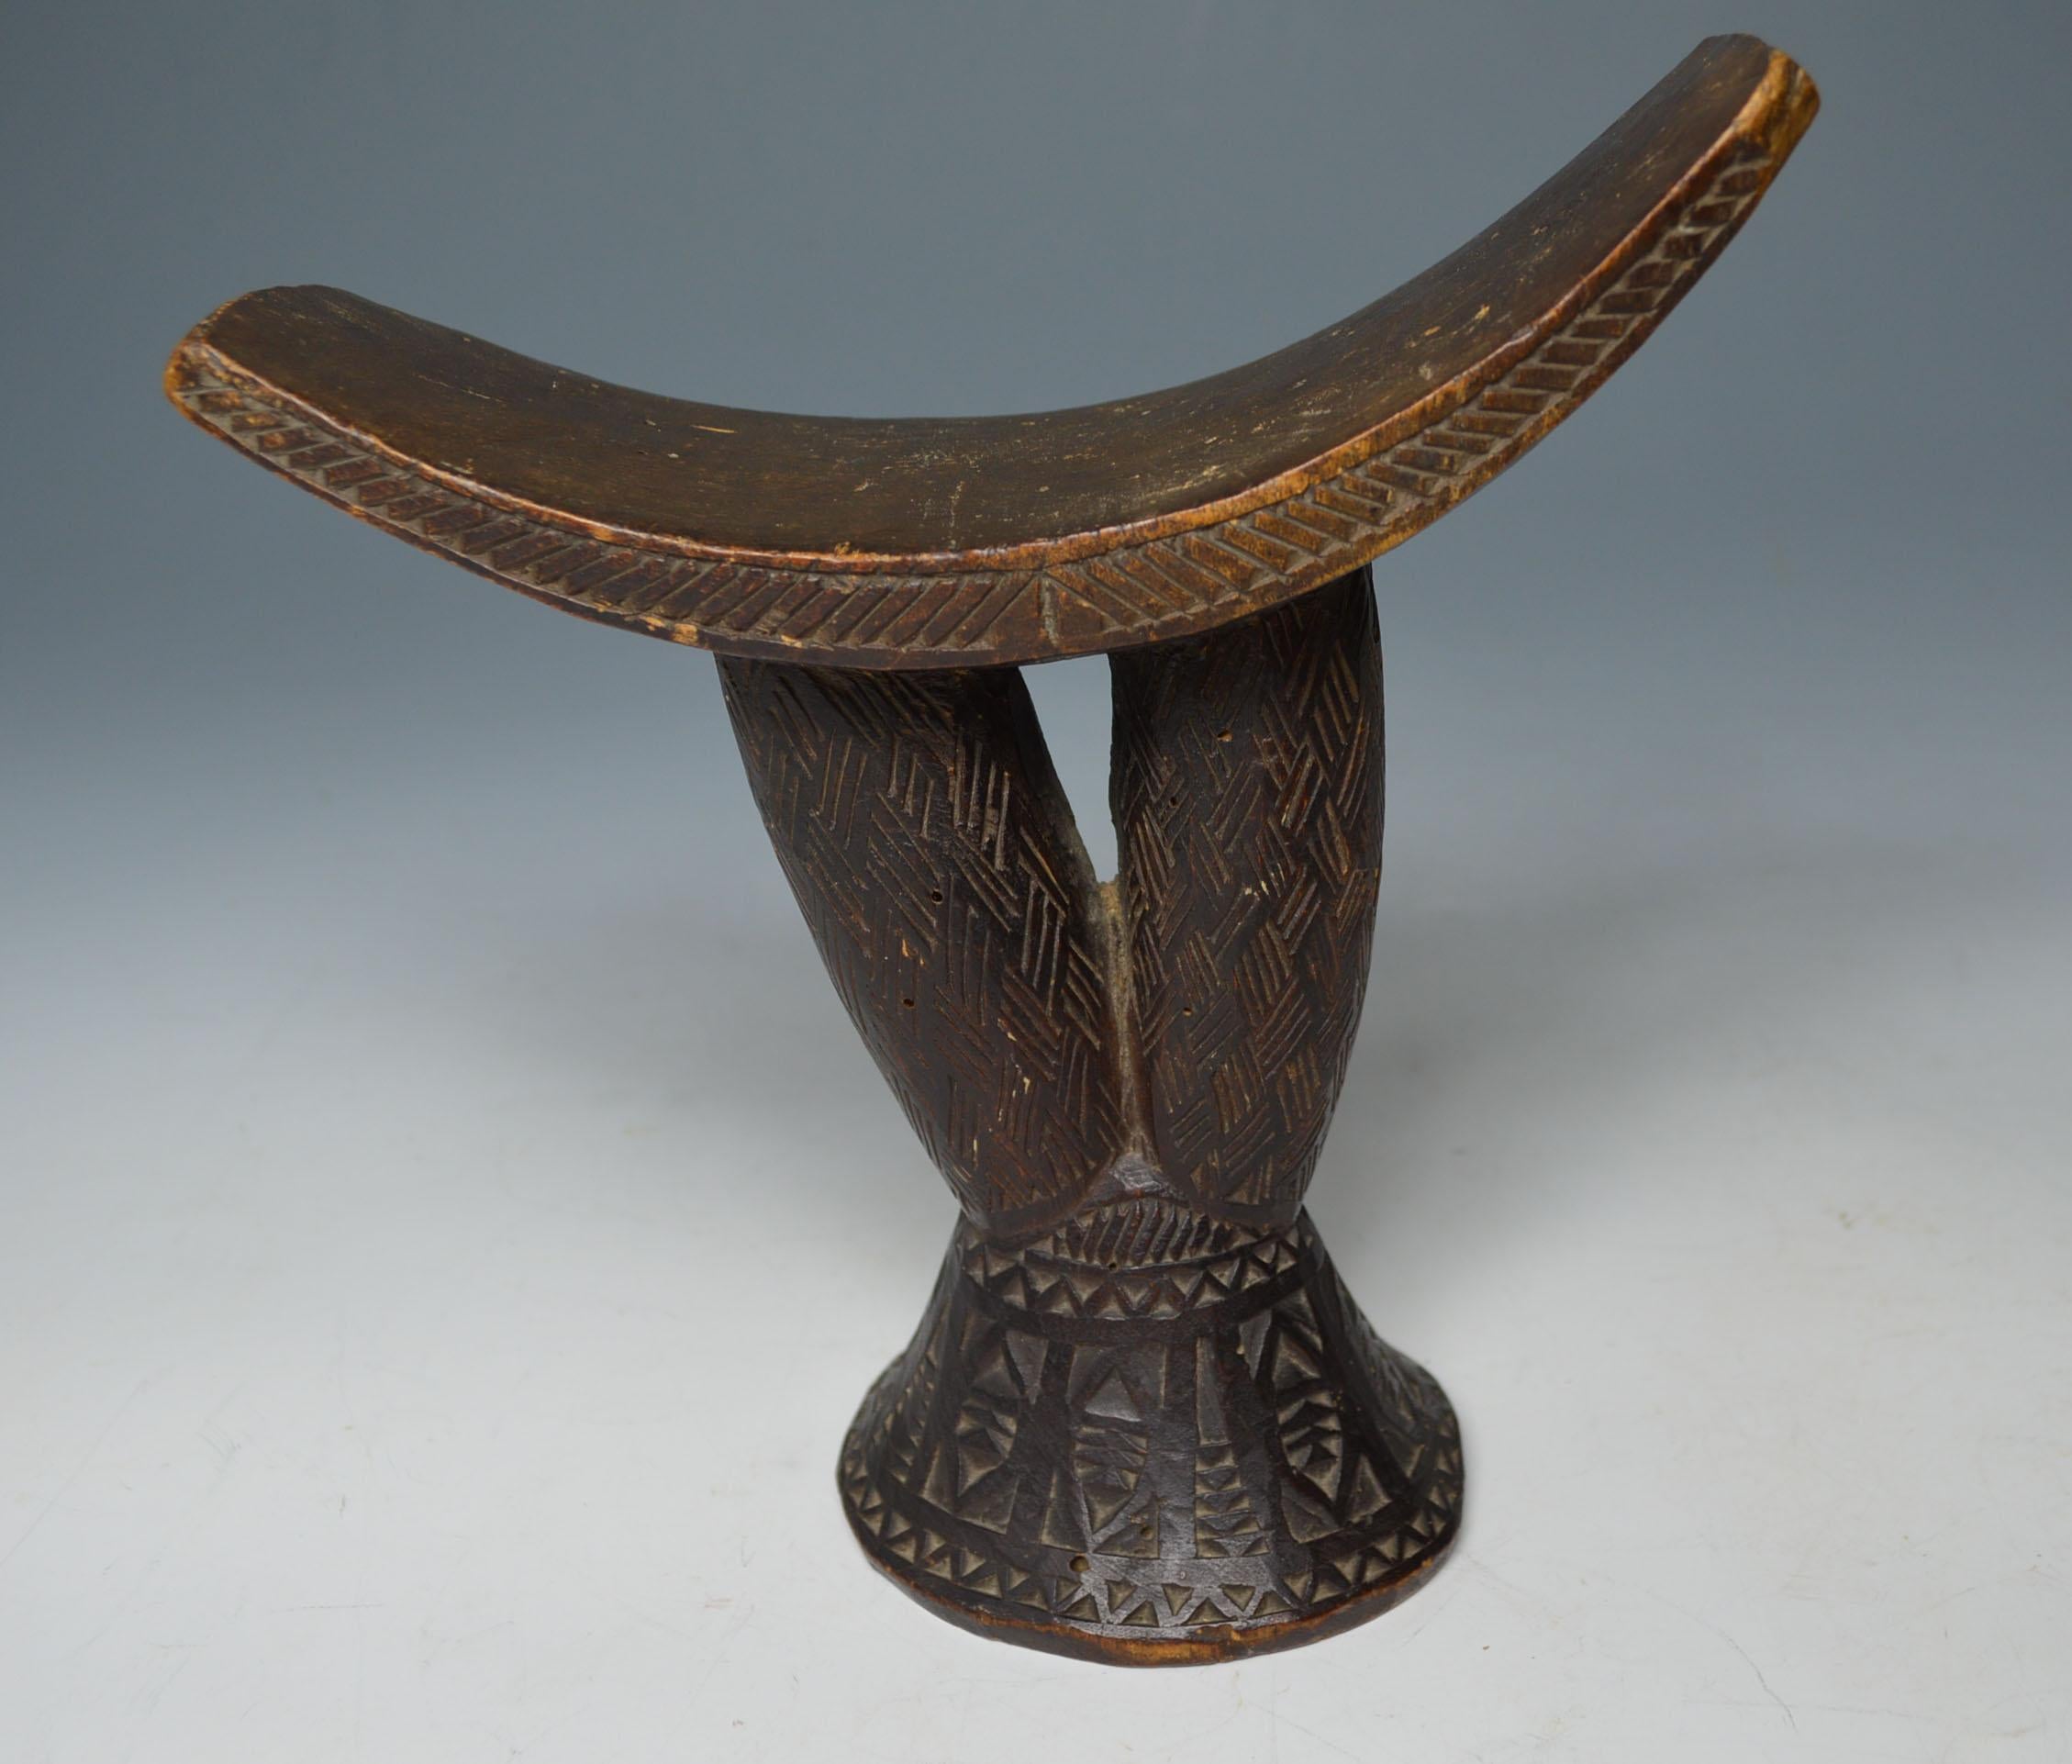 African tribal fine old headrest Afar Danakil Ethiopia
A superb rare example of a Afar or Danakil tribal headrest
Raised on two central branch pillars profusely carved on the underside with geometric patterns
Period:   early 20th century,
Provenance